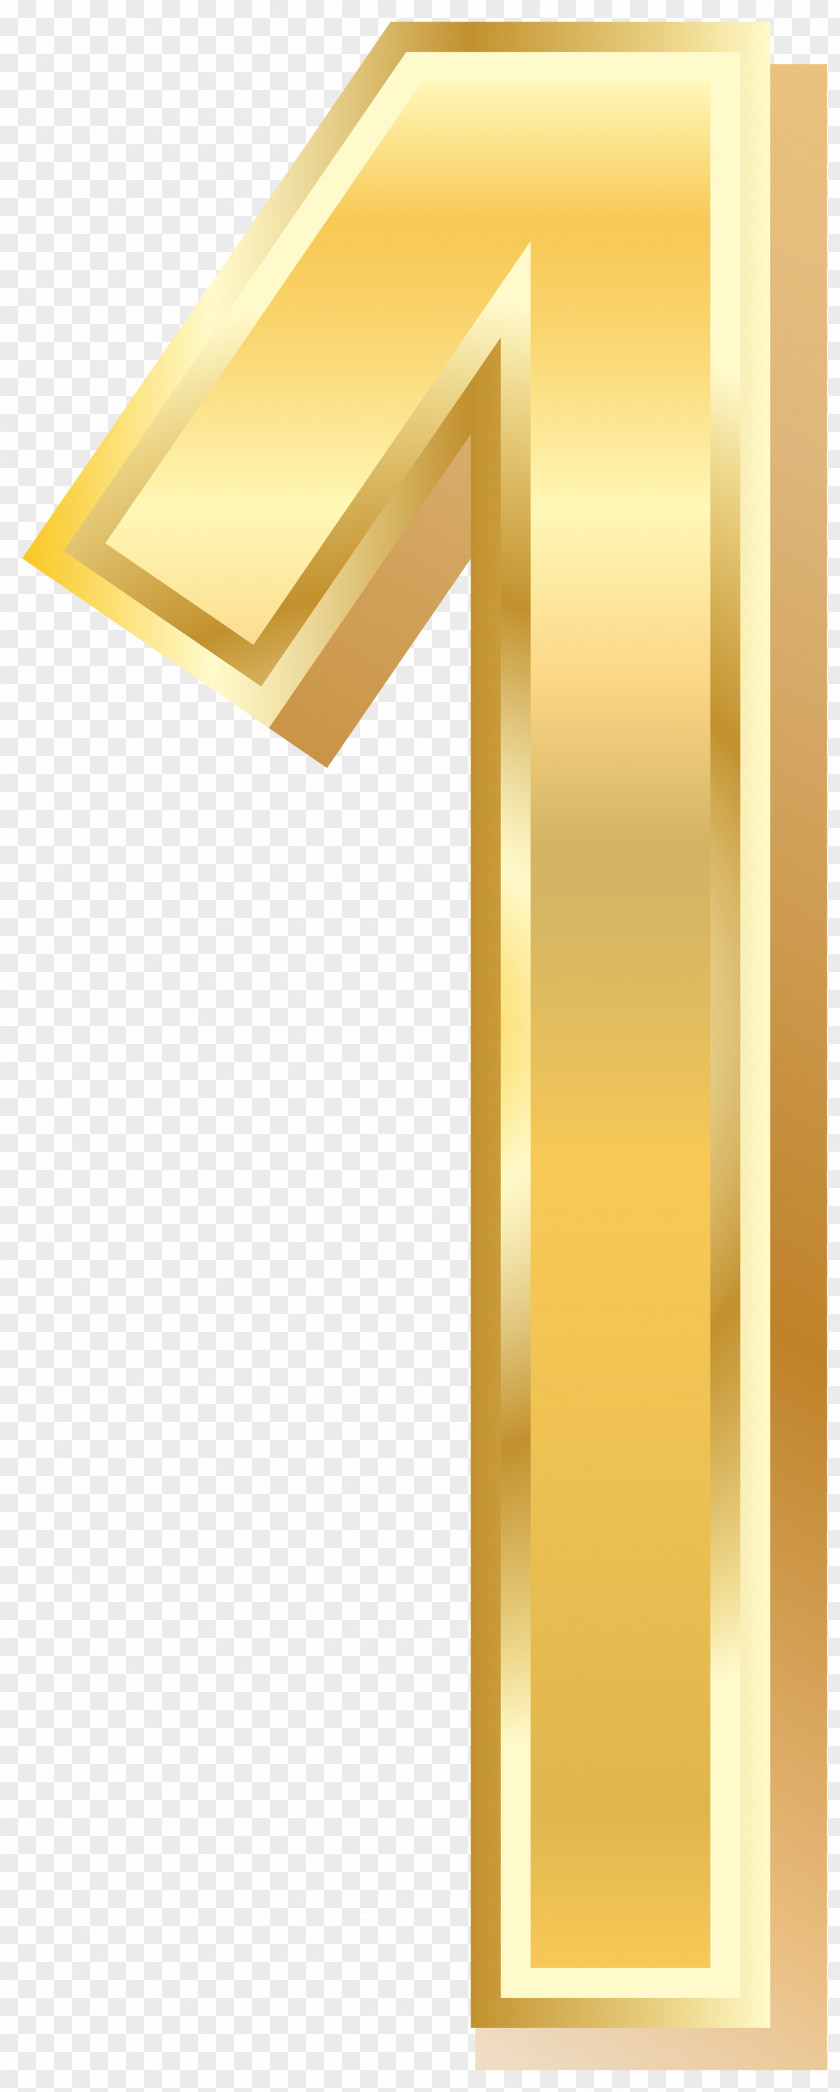 Gold Style Number One Clip Art Image Numerical Digit Decimal Numeral System PNG